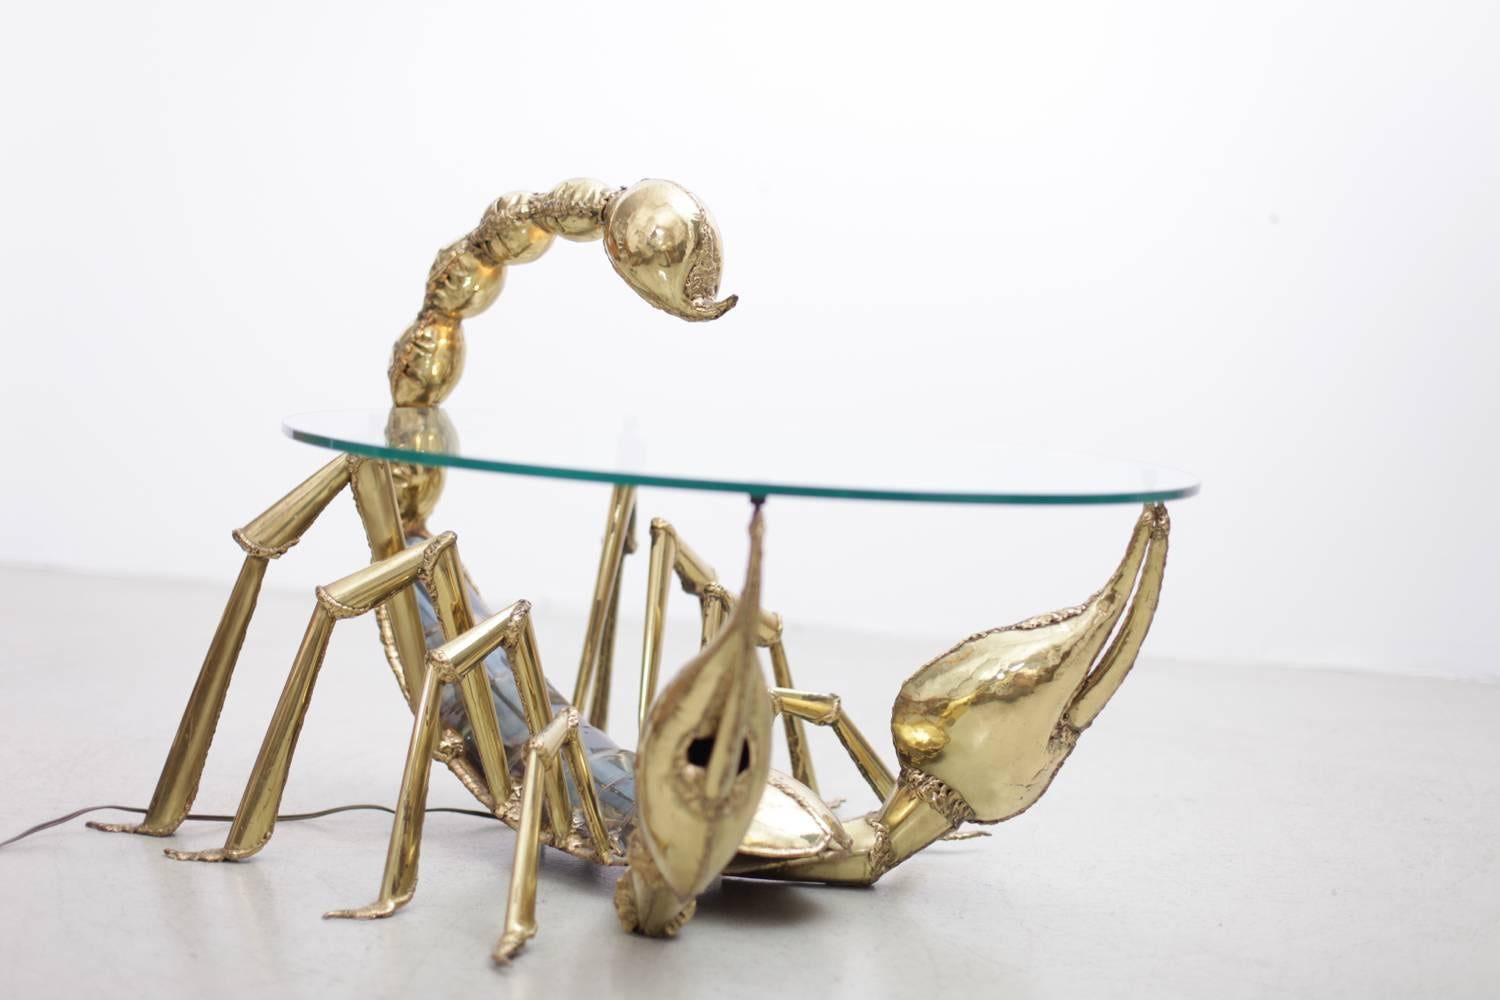 Very rare brass coffee or side table designed and produced by Jacques Duval-Brasseur in the 1970s. The table is made of brass and has a glass plate. The table is illuminated by a lamp integrated in the tail of the scorpion. One of a few ever